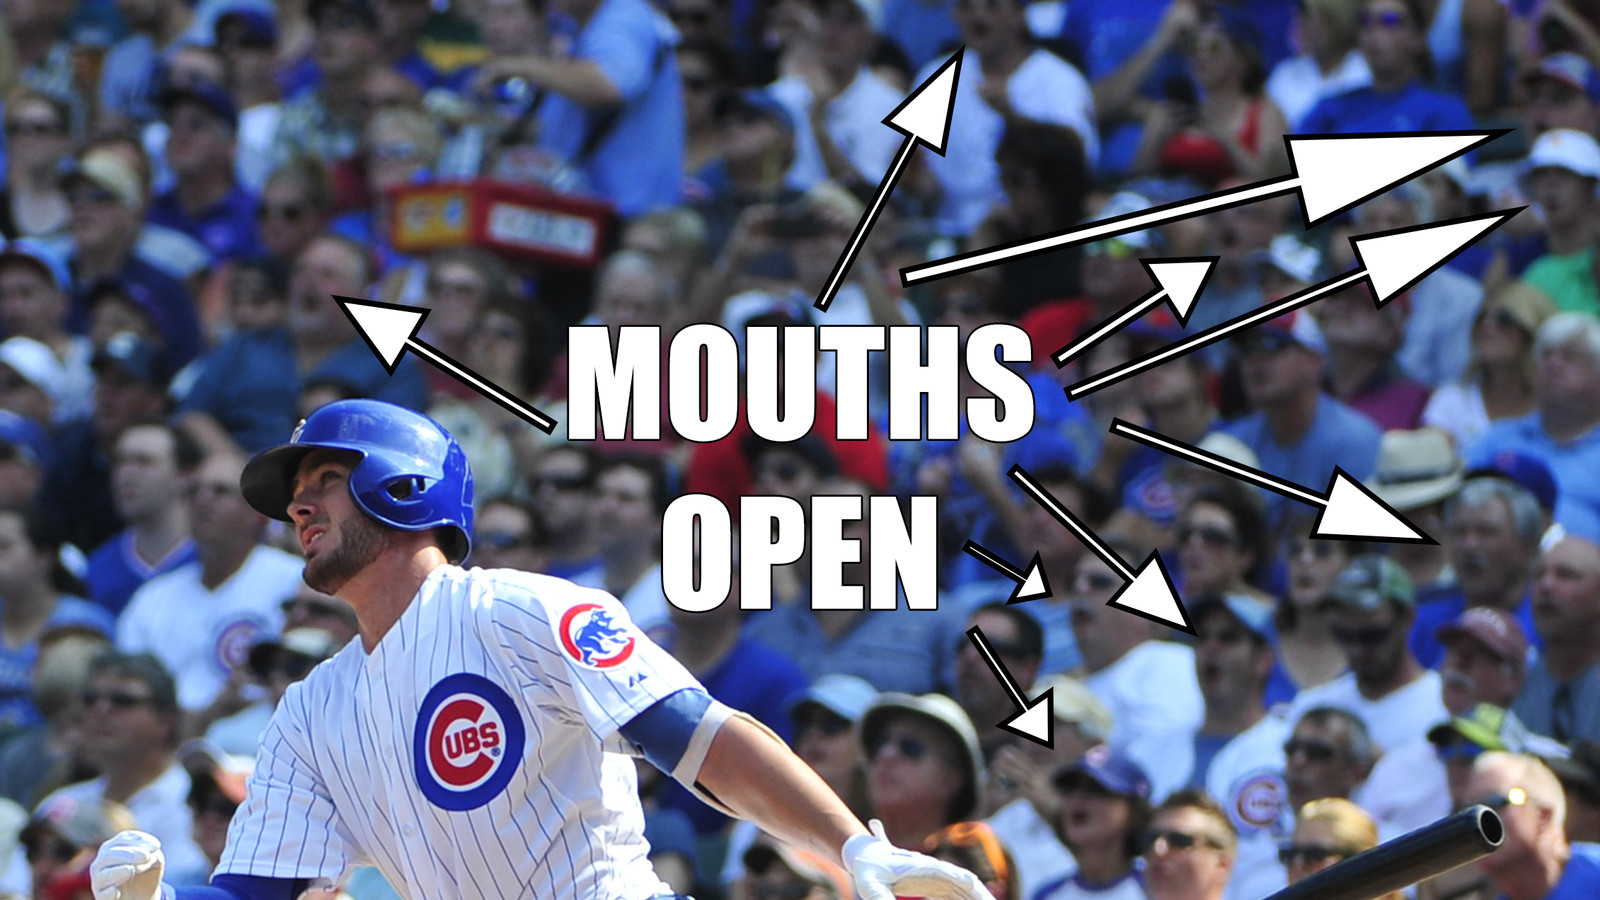 Kris Bryant Just Crushed A Home Run Into The Stratosphere